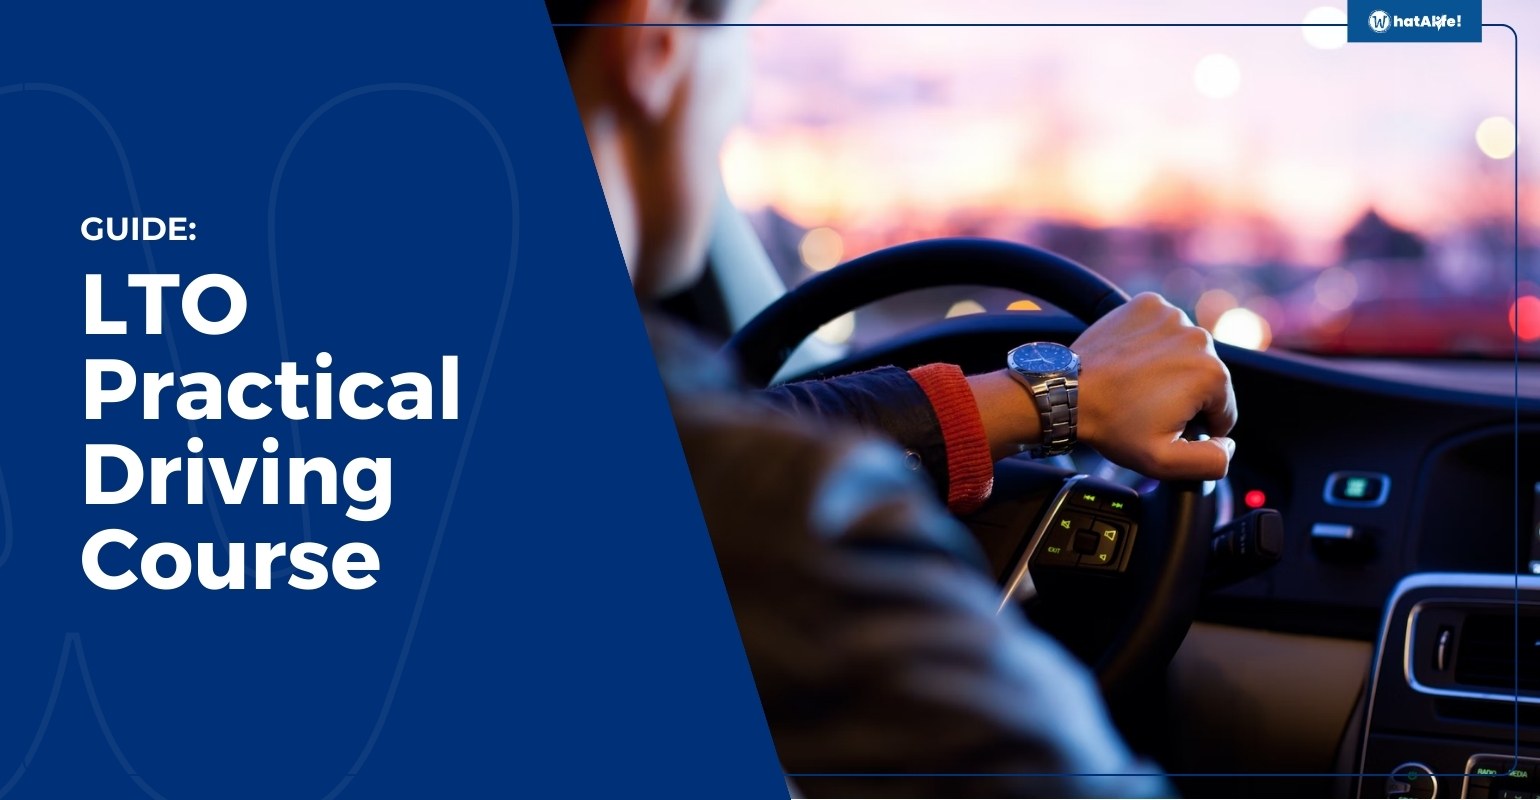 guide lto practical driving course